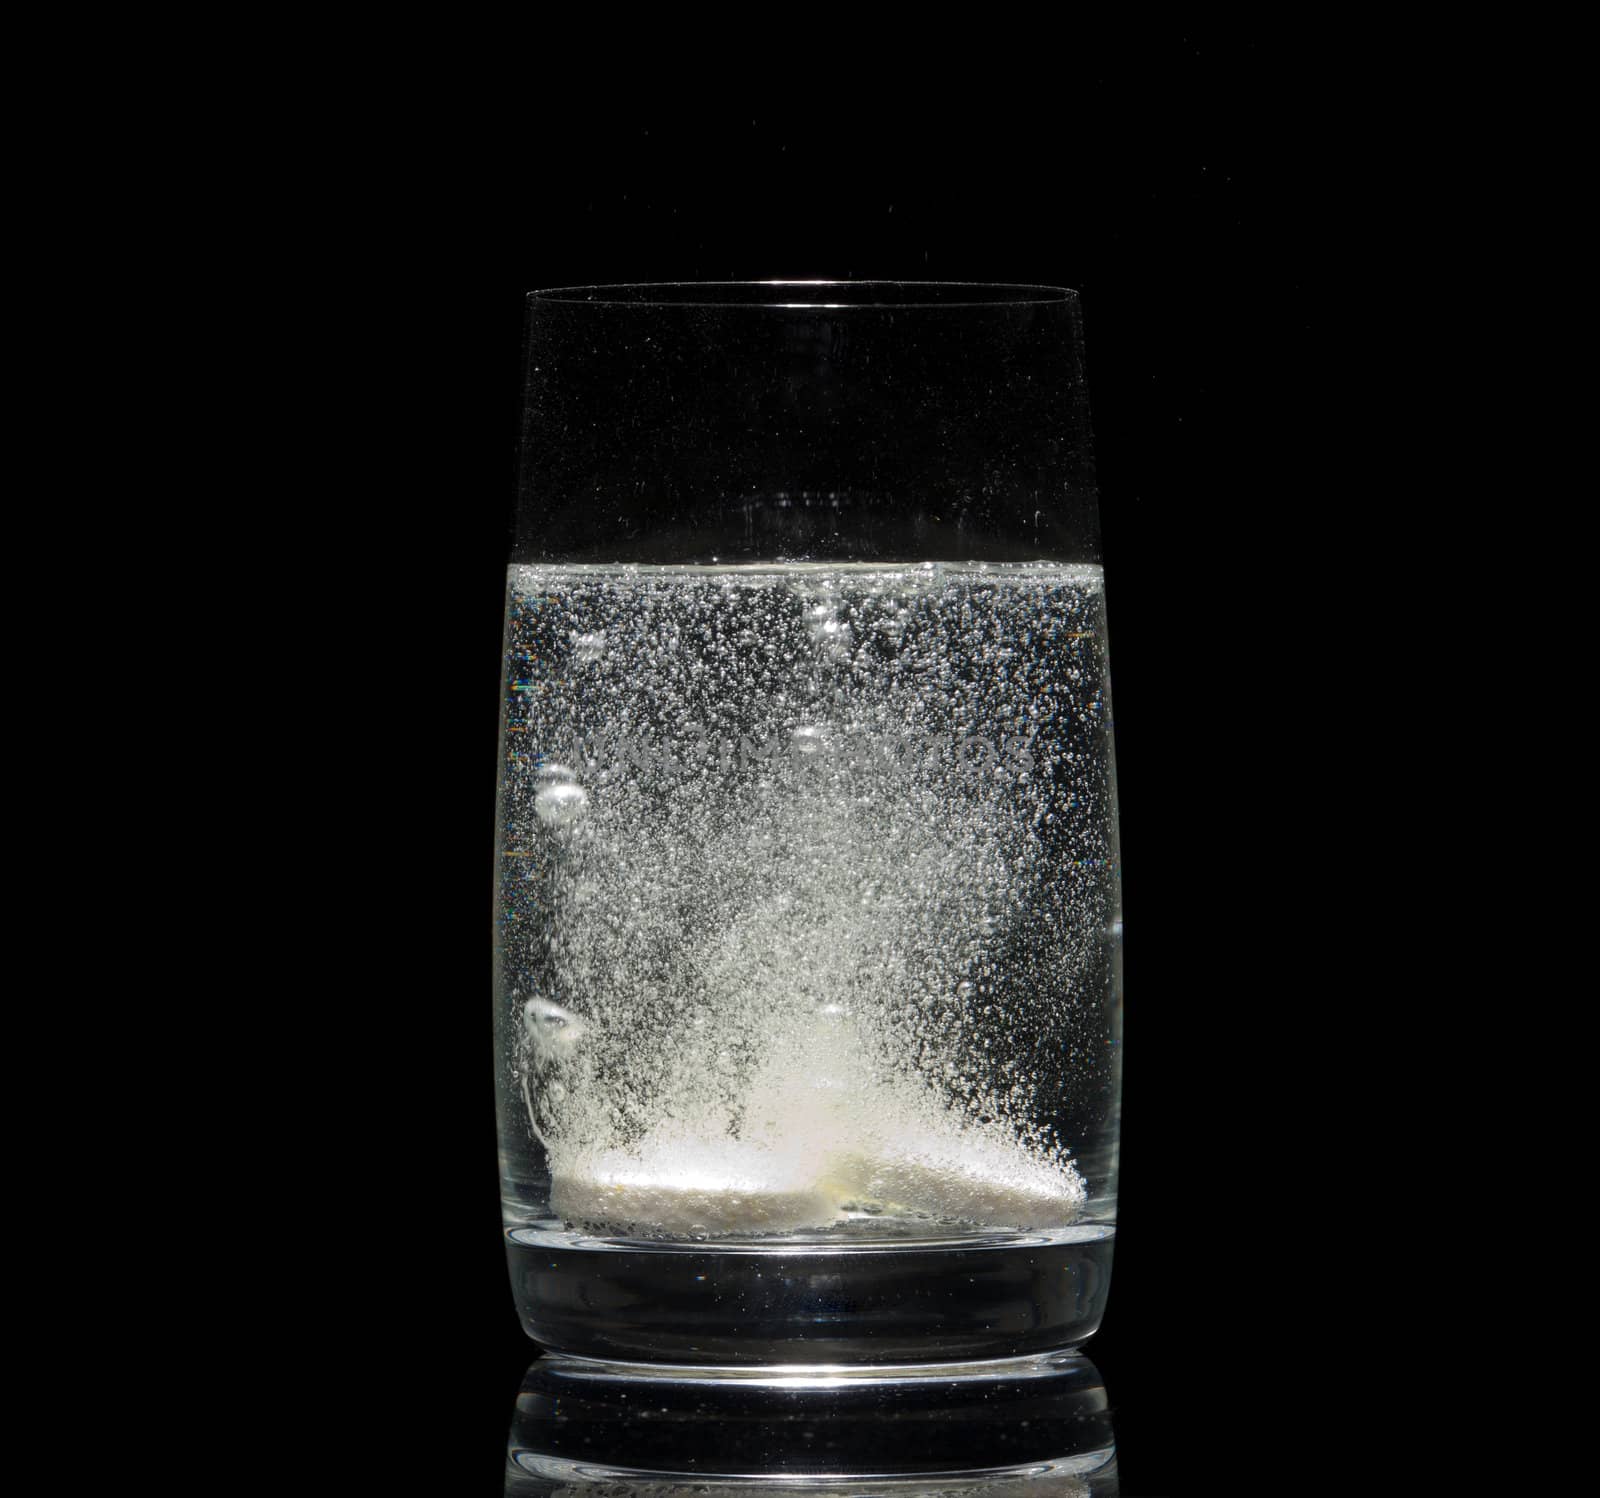 aspirin tablet in glass of water by Discovod